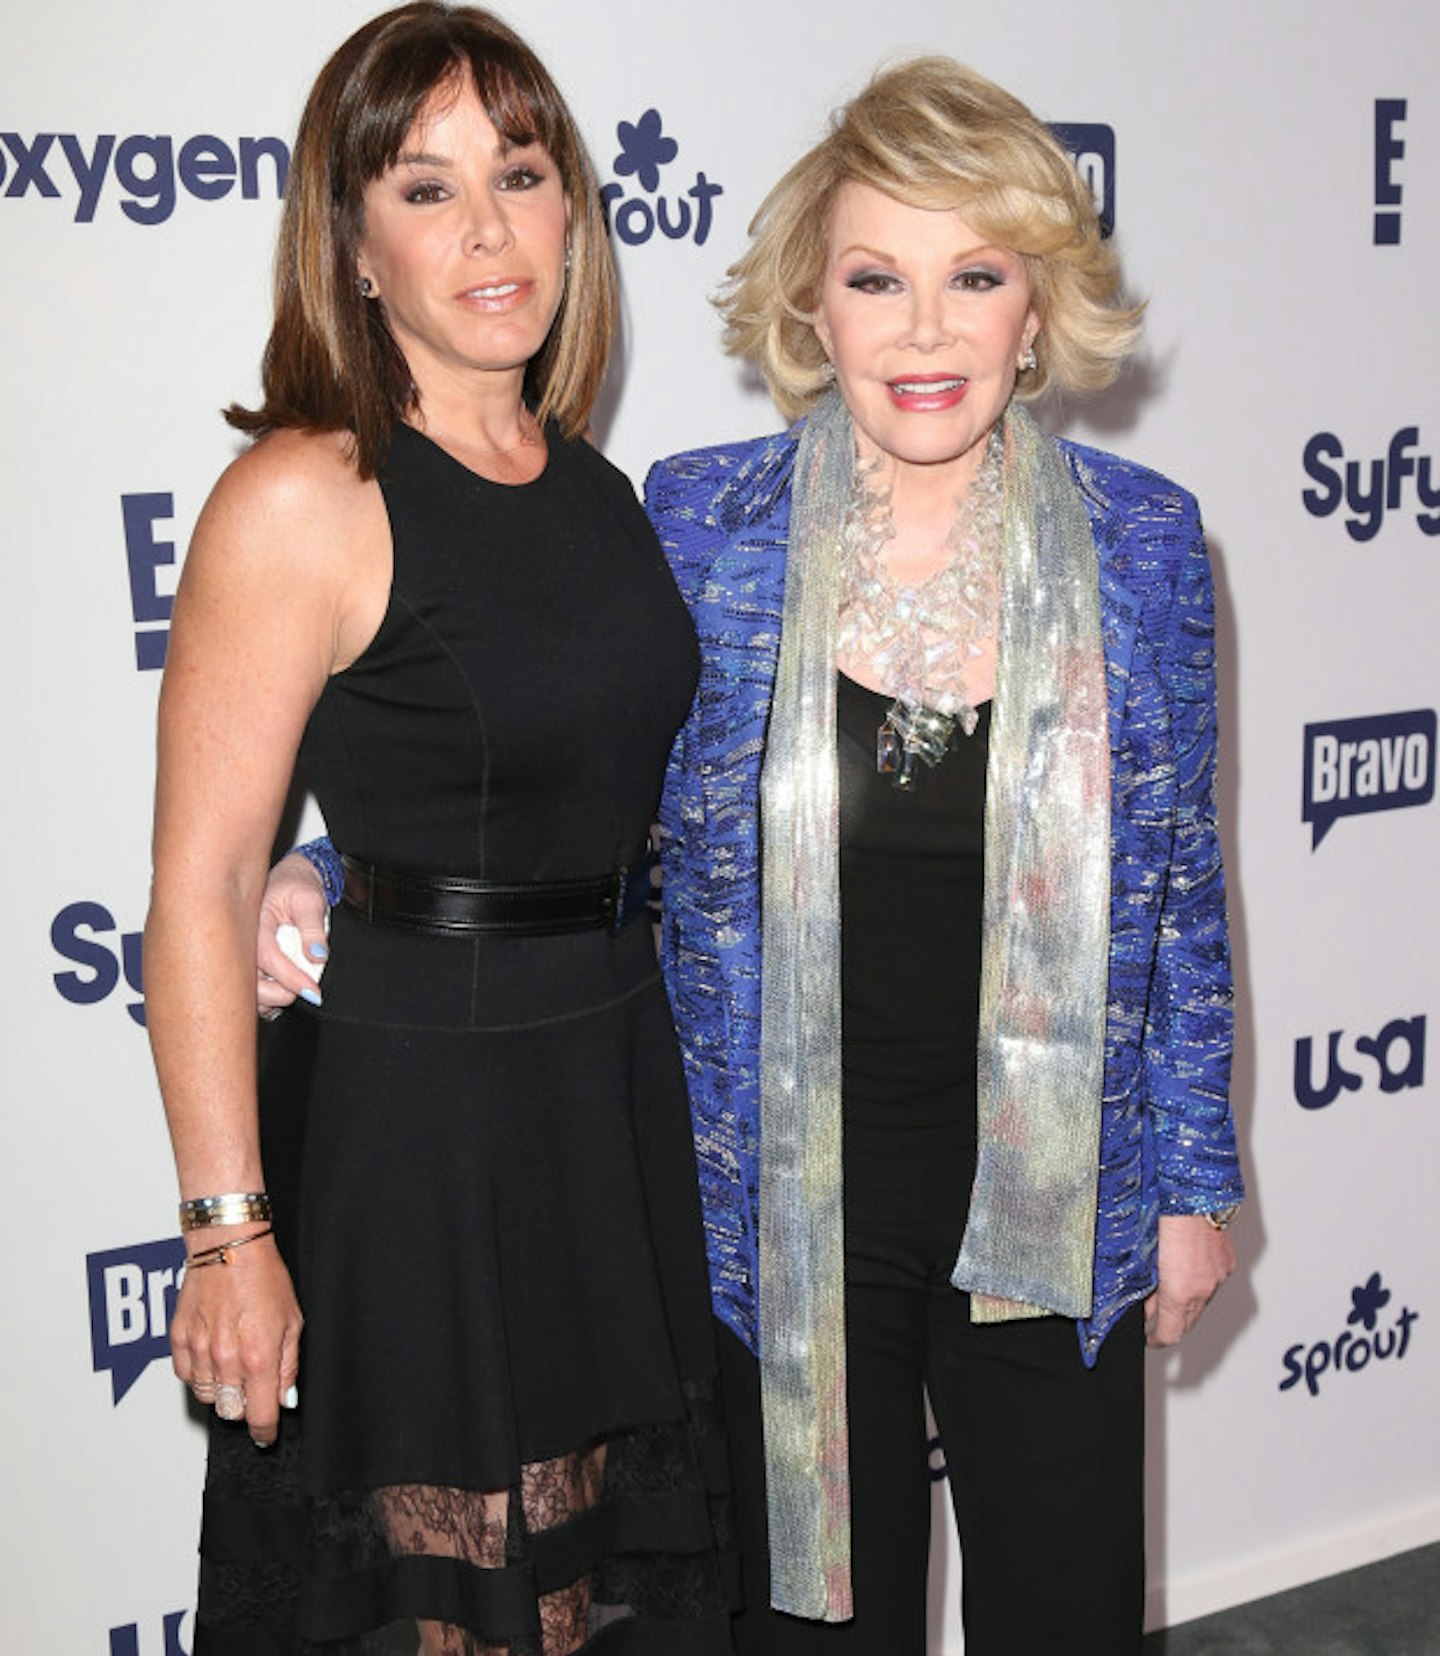 Joan with her daughter Melissa in May 2014